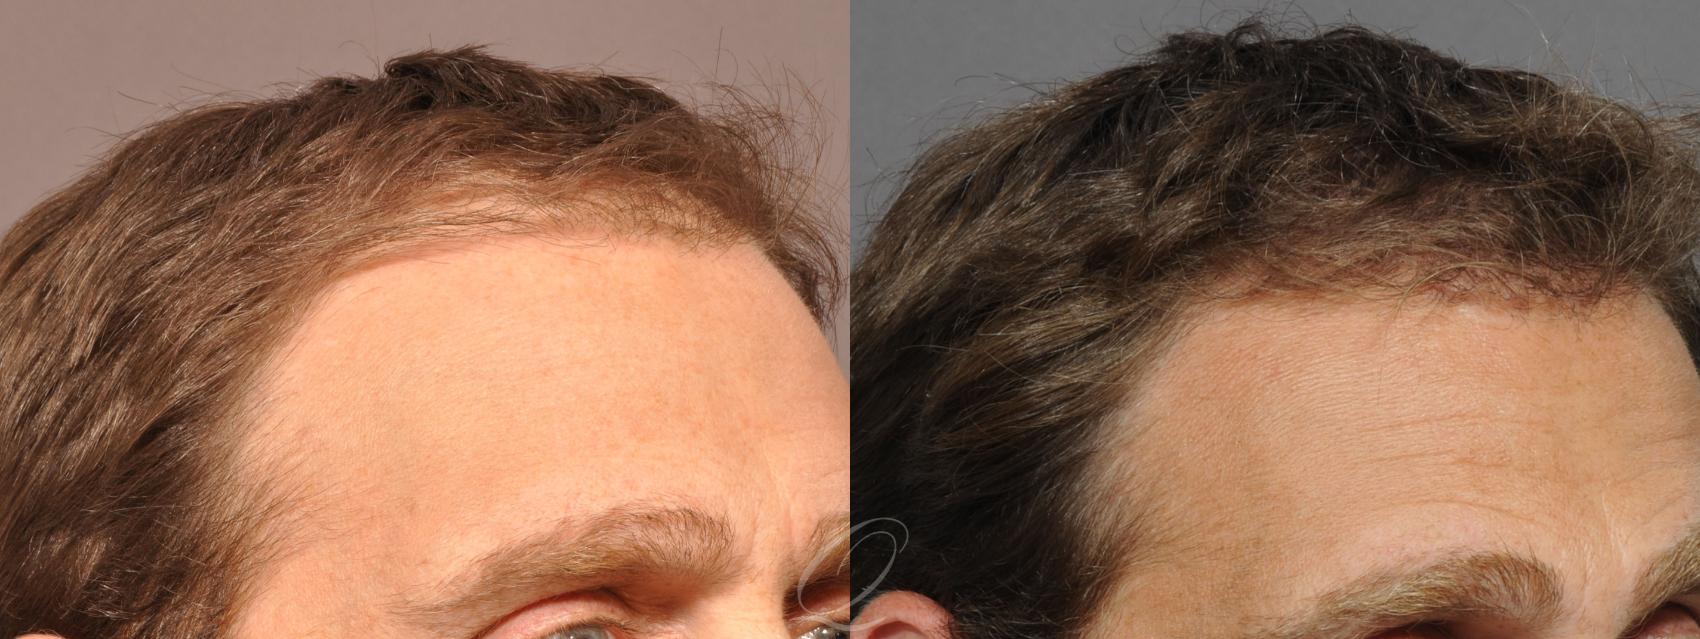 FUT Case 1042 Before & After View #3 | Rochester, Buffalo, & Syracuse, NY | Quatela Center for Hair Restoration